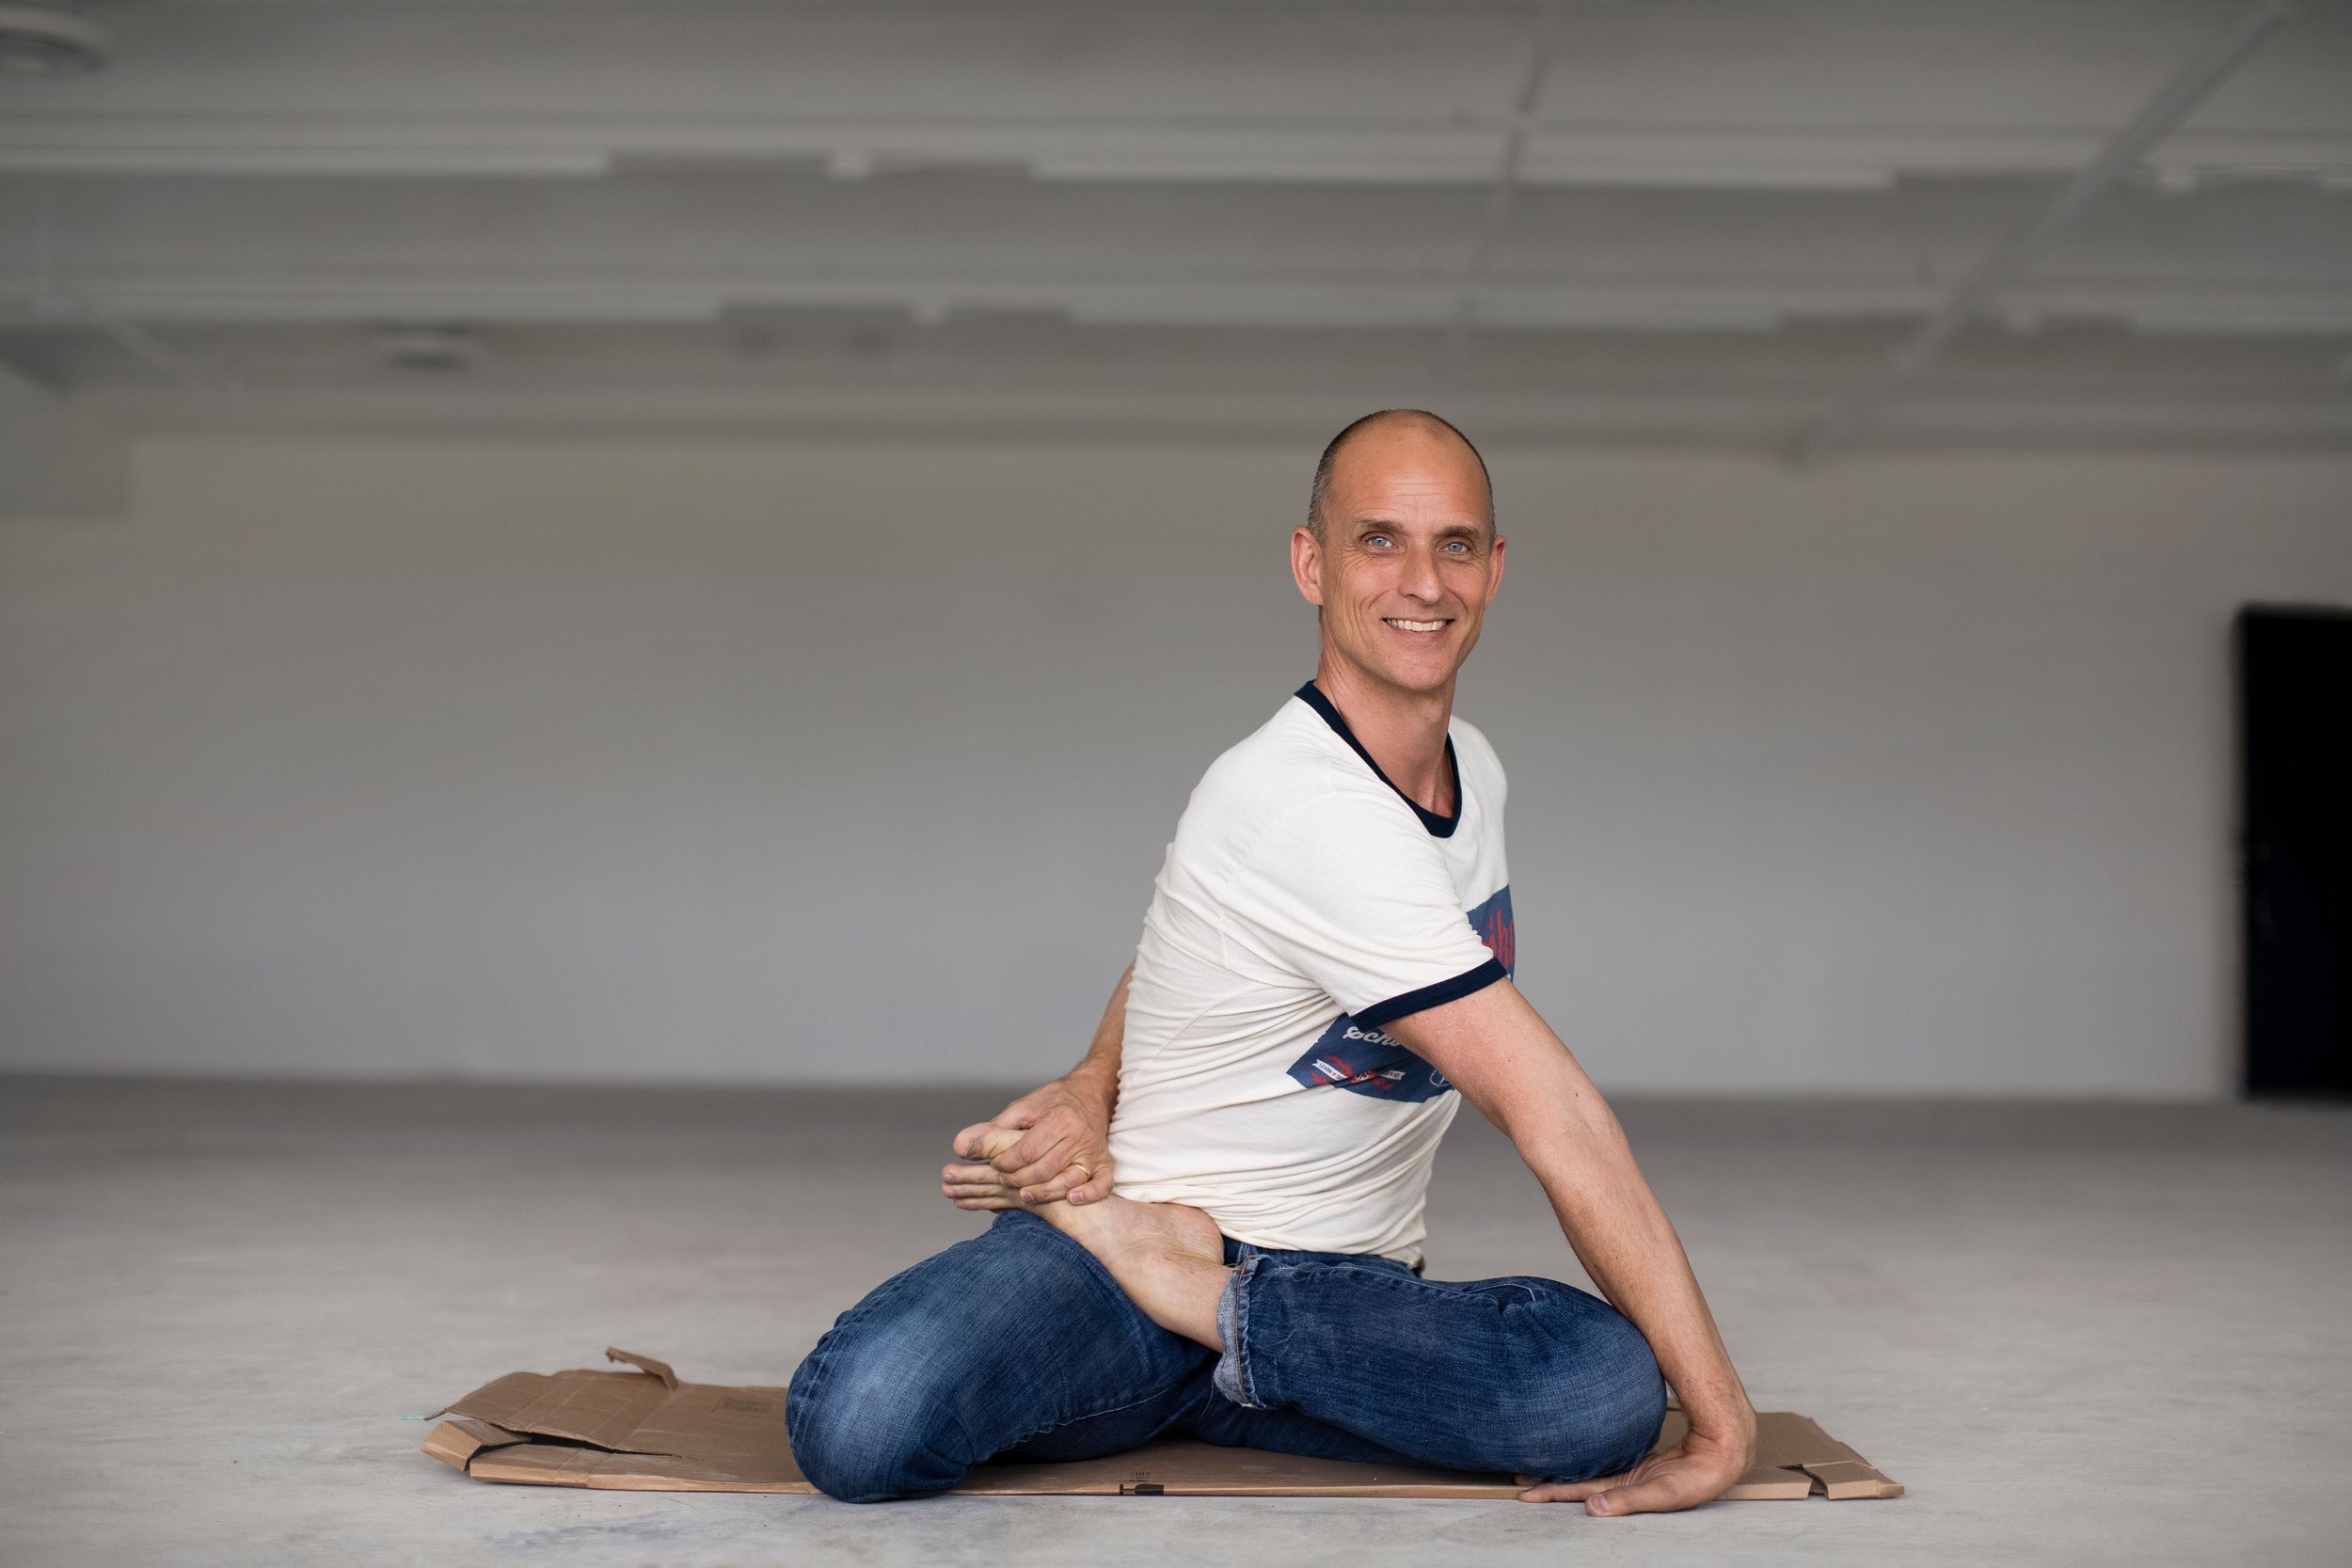 Exploring the Primary Series of Ashtanga Yoga: A Journey to Strength and  Flexibility – OmStars